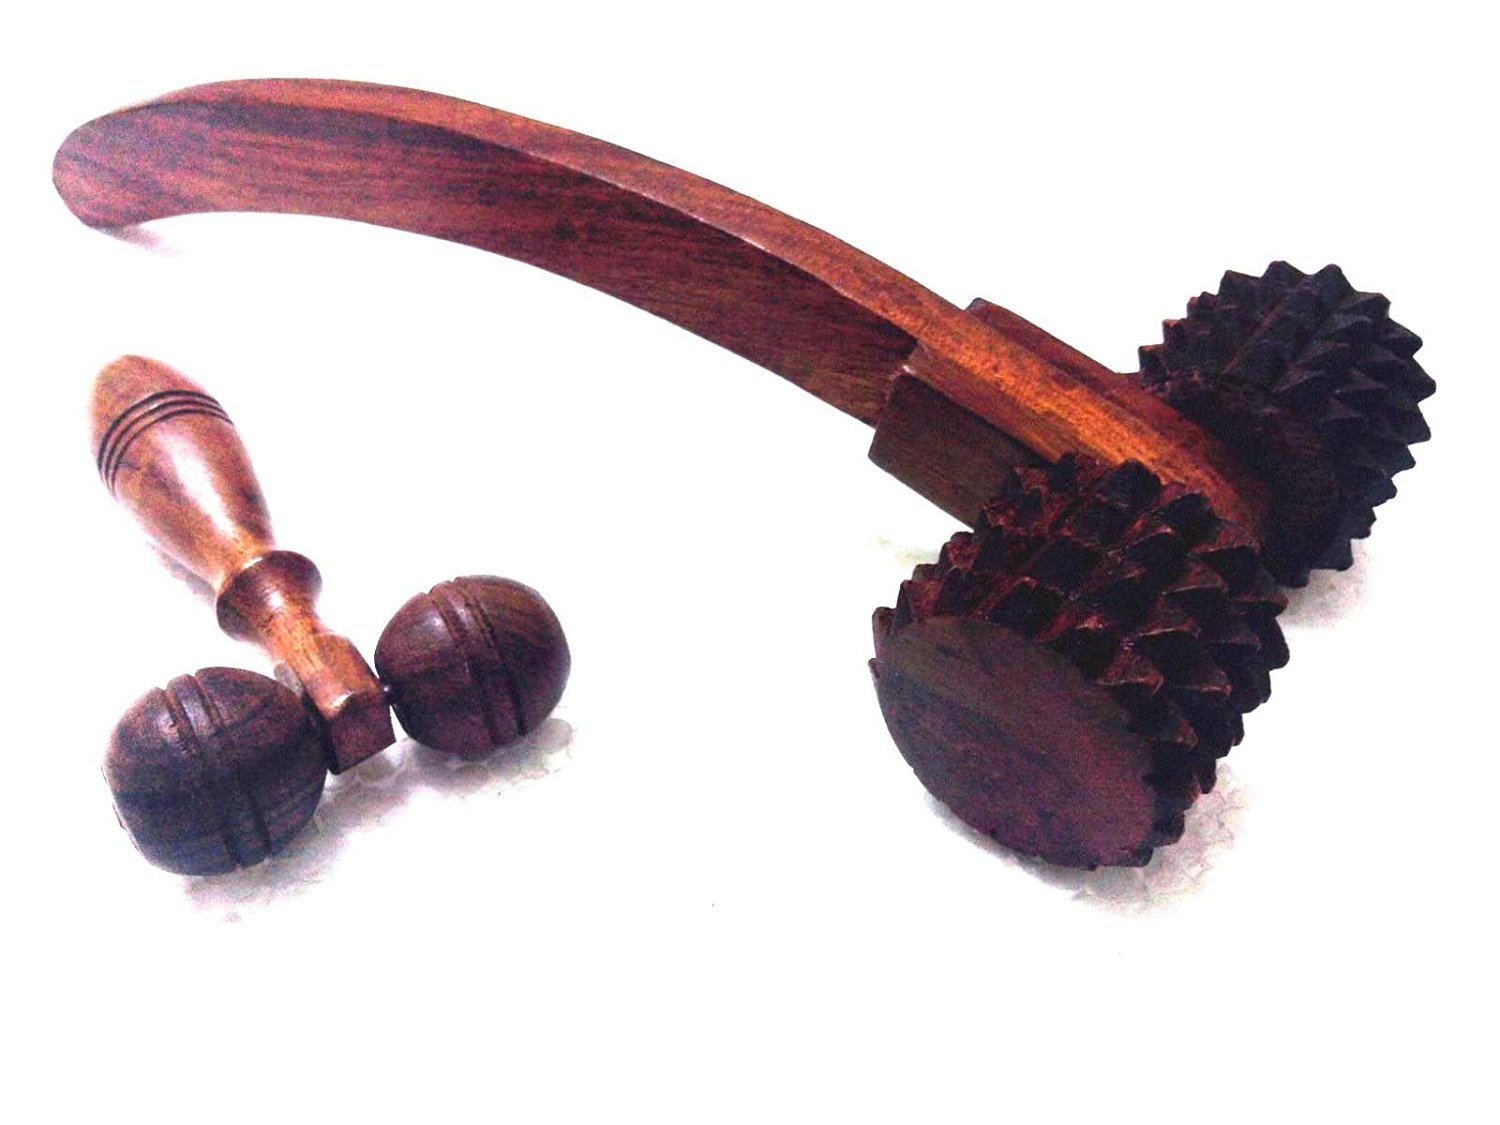 Buy Desi Karigar Wooden Body Massager With Free Face Massager Online ₹399 From Shopclues